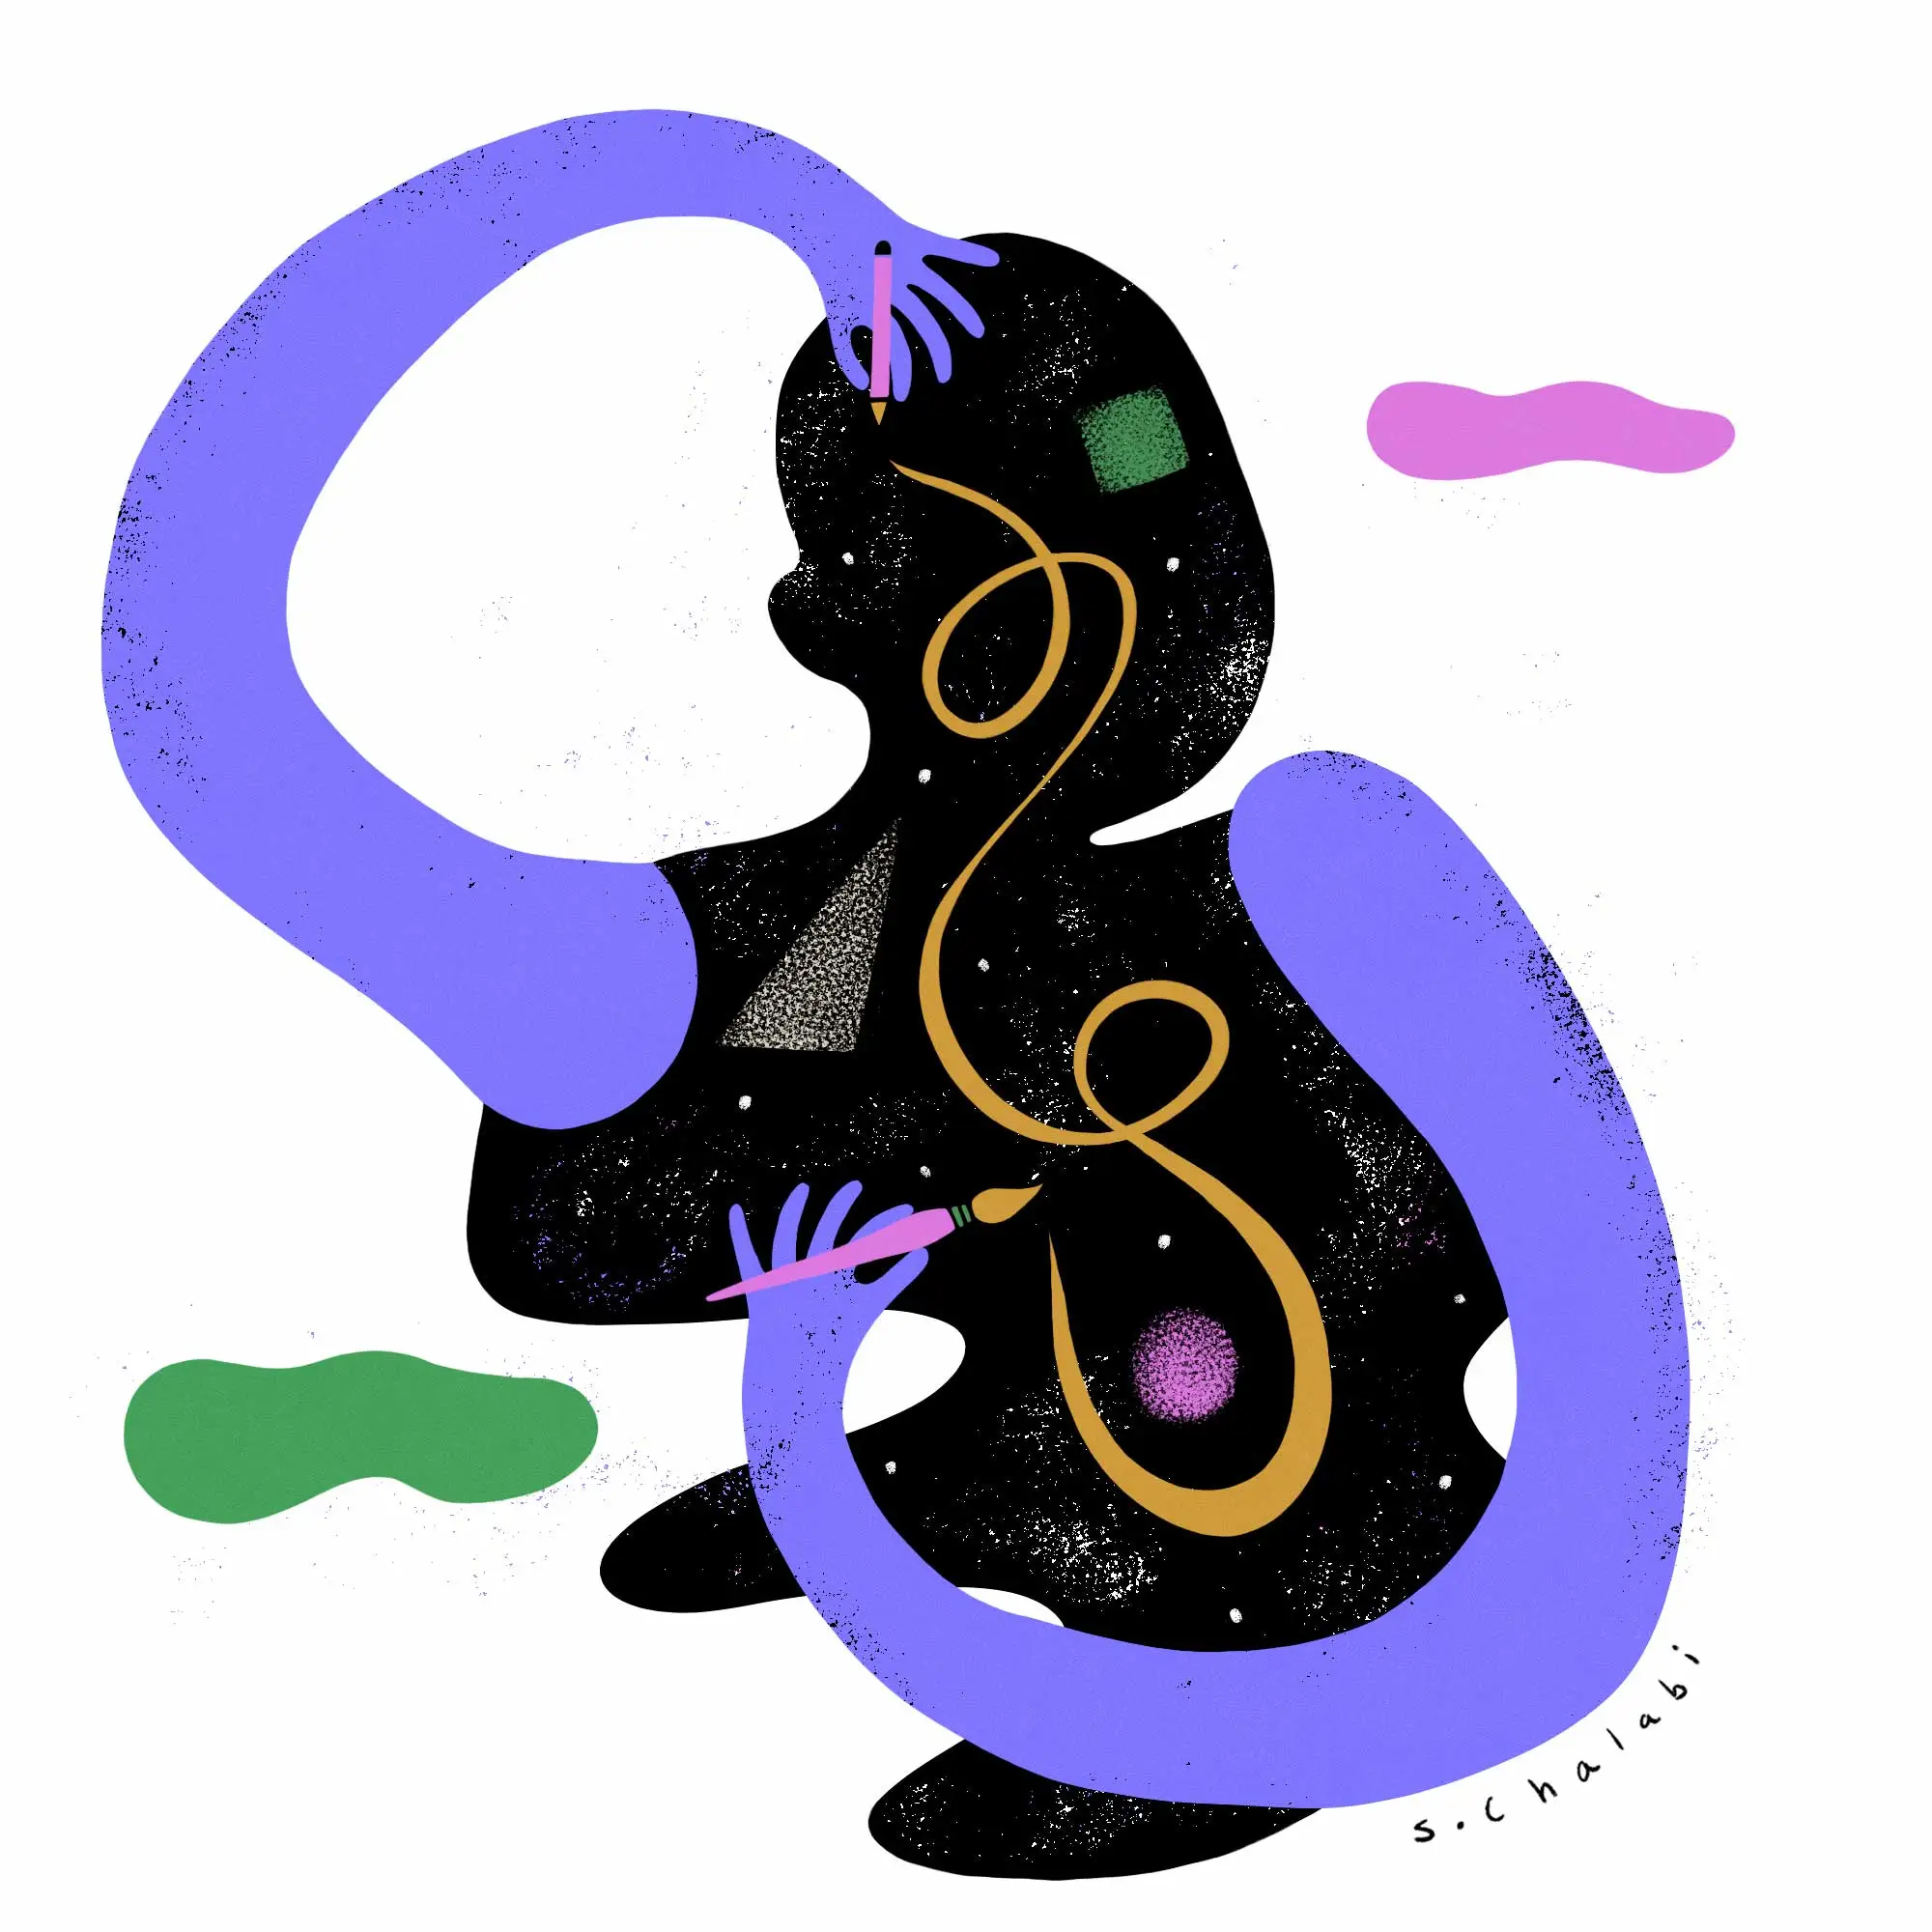 A figure in black with bright purple arms reaches inward with a pencil and paintbrush to create shapes and lines inside the body of the figure.